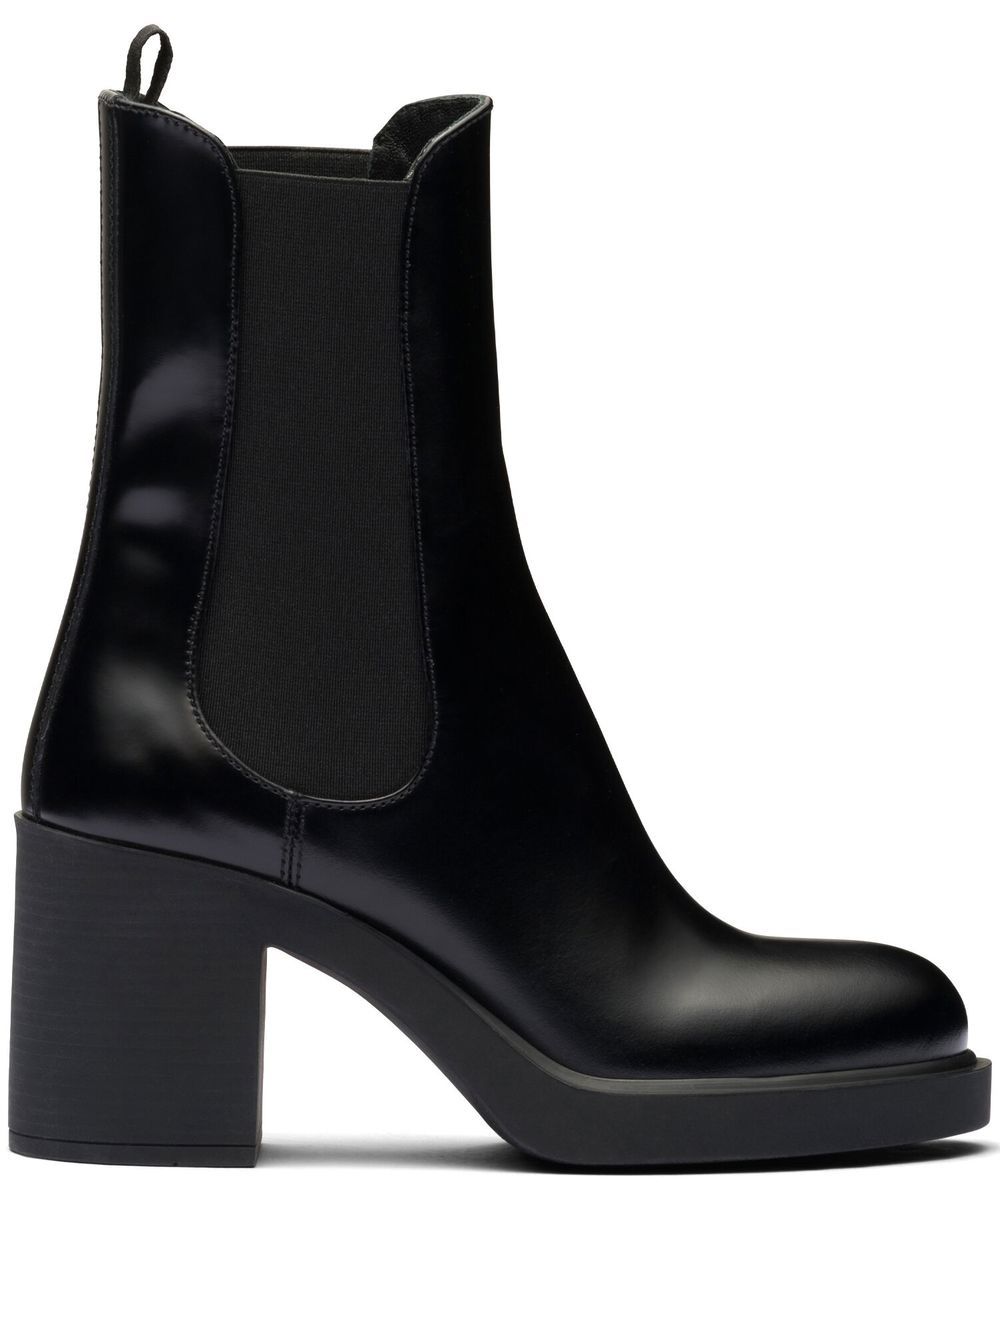 Prada Brushed-Leather 85mm leather boots - Black